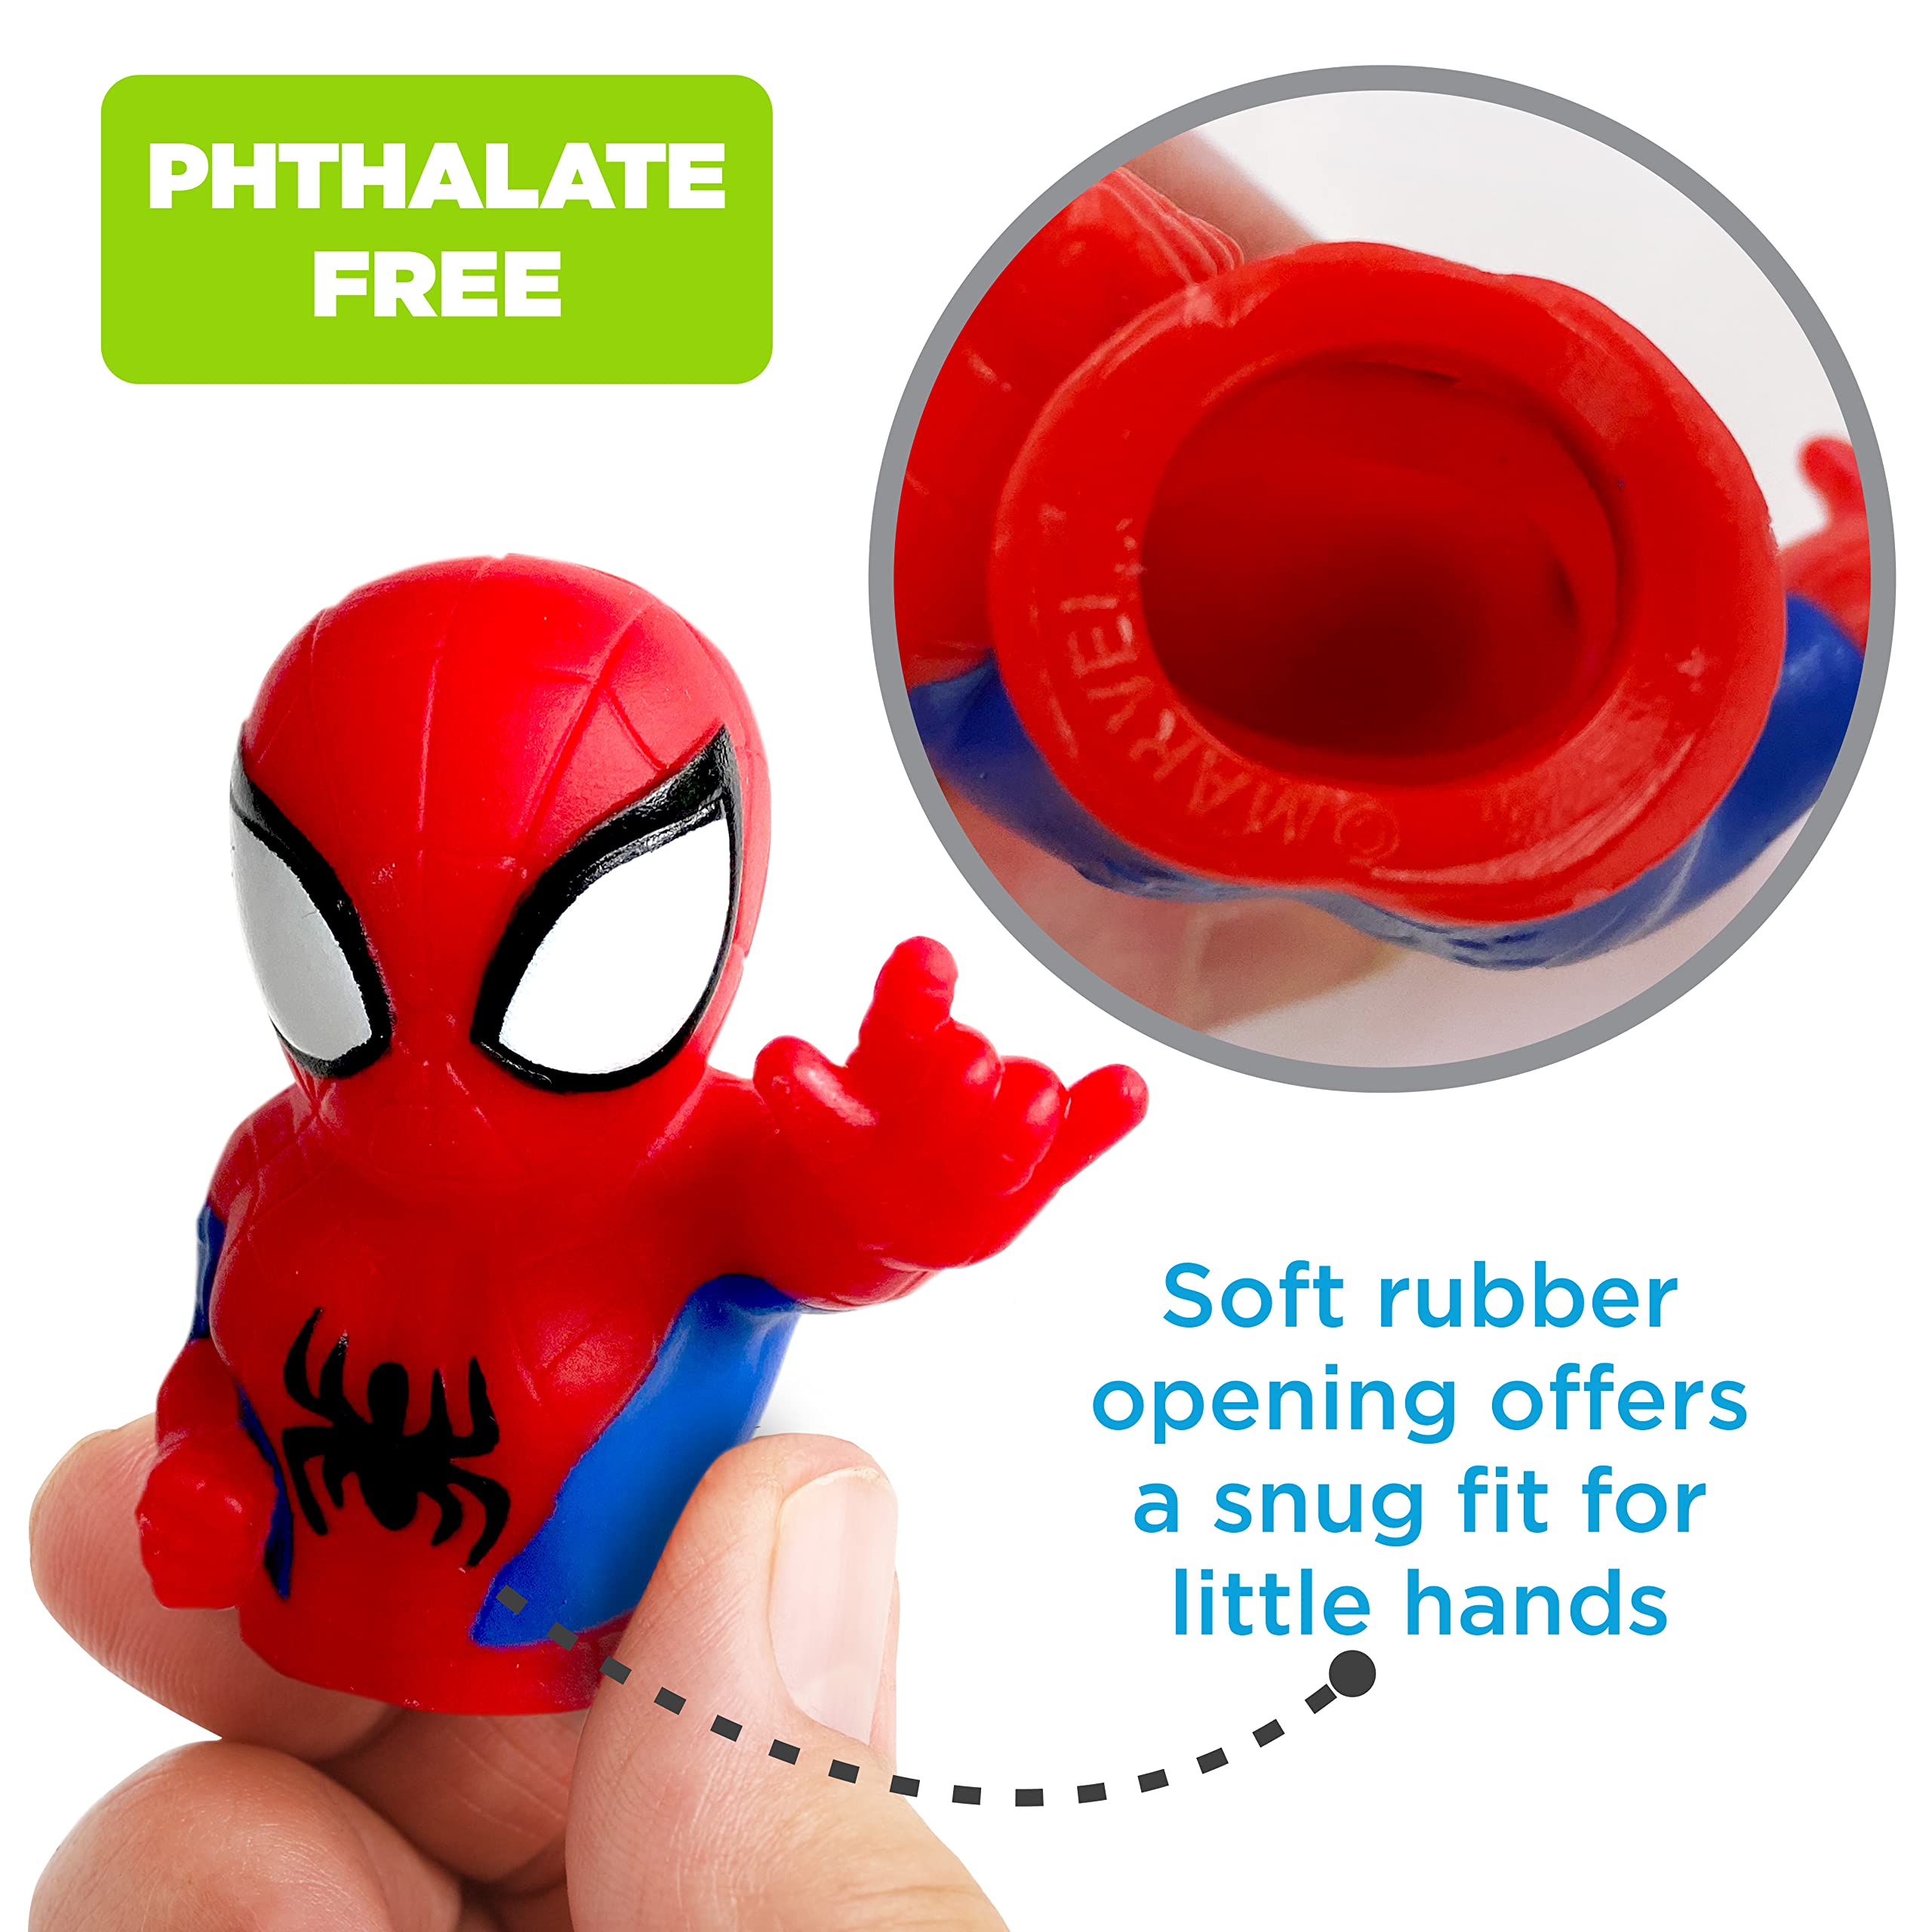 Spidey & His Amazing Friends 10 Piece Finger Puppet Set - Party Favors, Educational, Bath Toys, Floating Pool Toys, Beach Toys, Finger Toys, Playtime